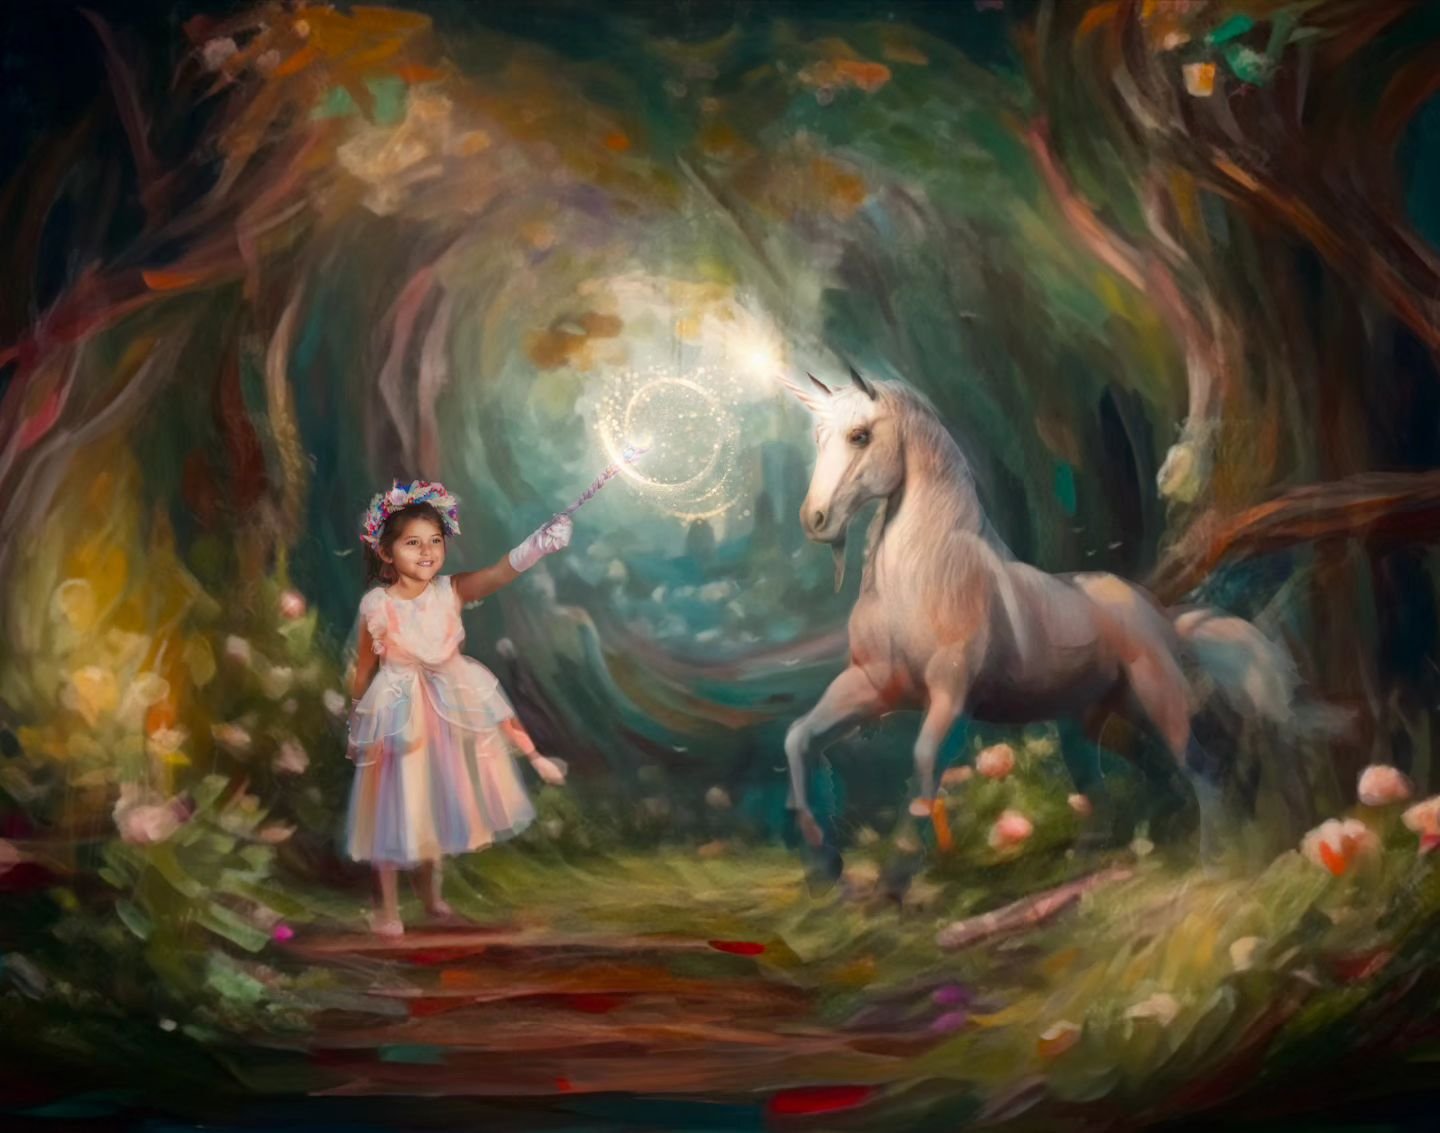 Gianna loves unicorns so I wanted to create a fantasy themed photo of her with a unicorn. I'm not the greatest at composites, but I think it turned out well. I have a million things to do, but decided to spend the entire morning creating this... 😅

